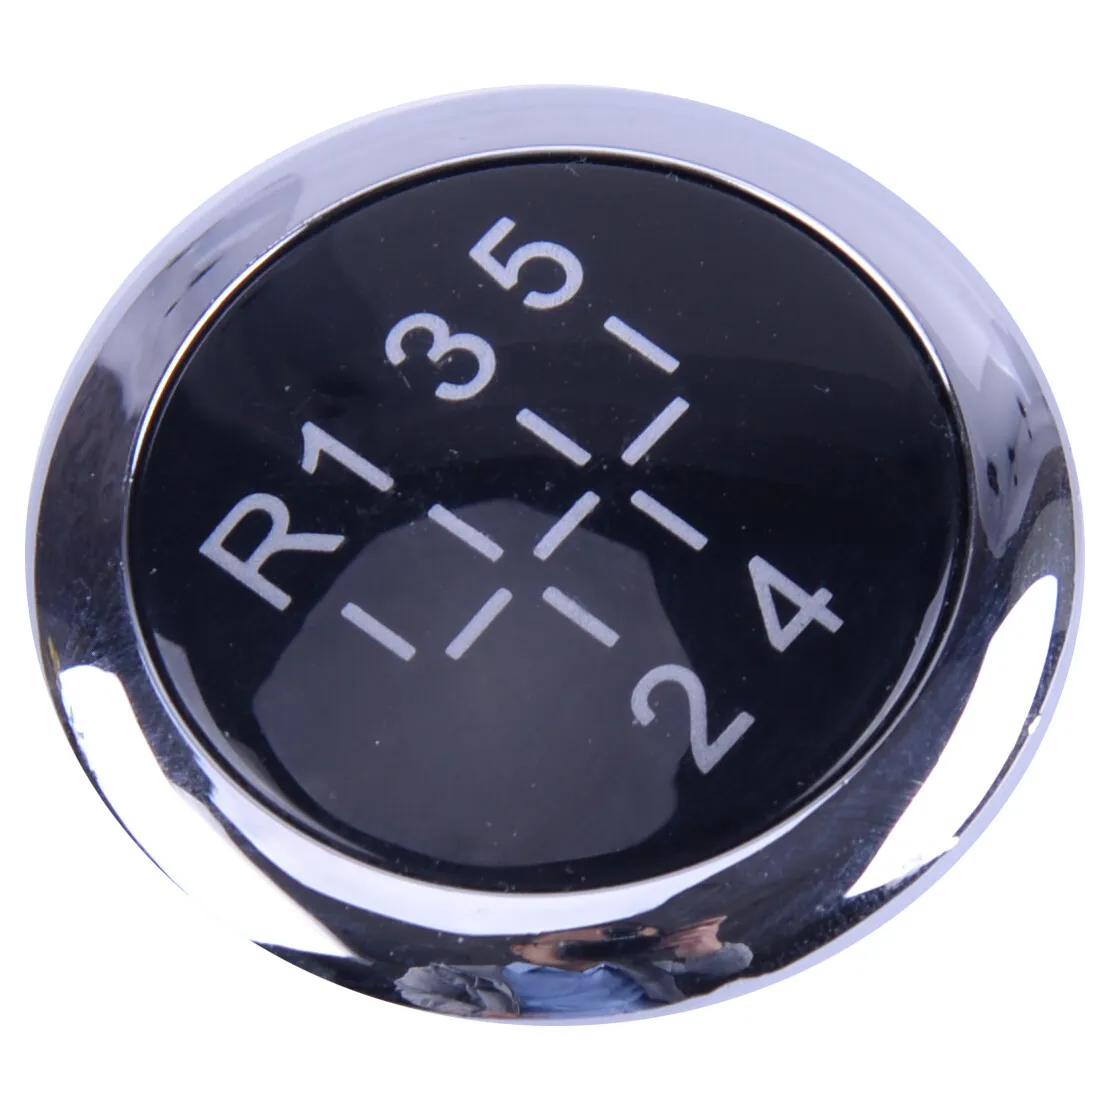 5 Speed Gear Knob Badge Cap Cover Fit For Vauxhall/Opel Astra H Corsa D  04-10